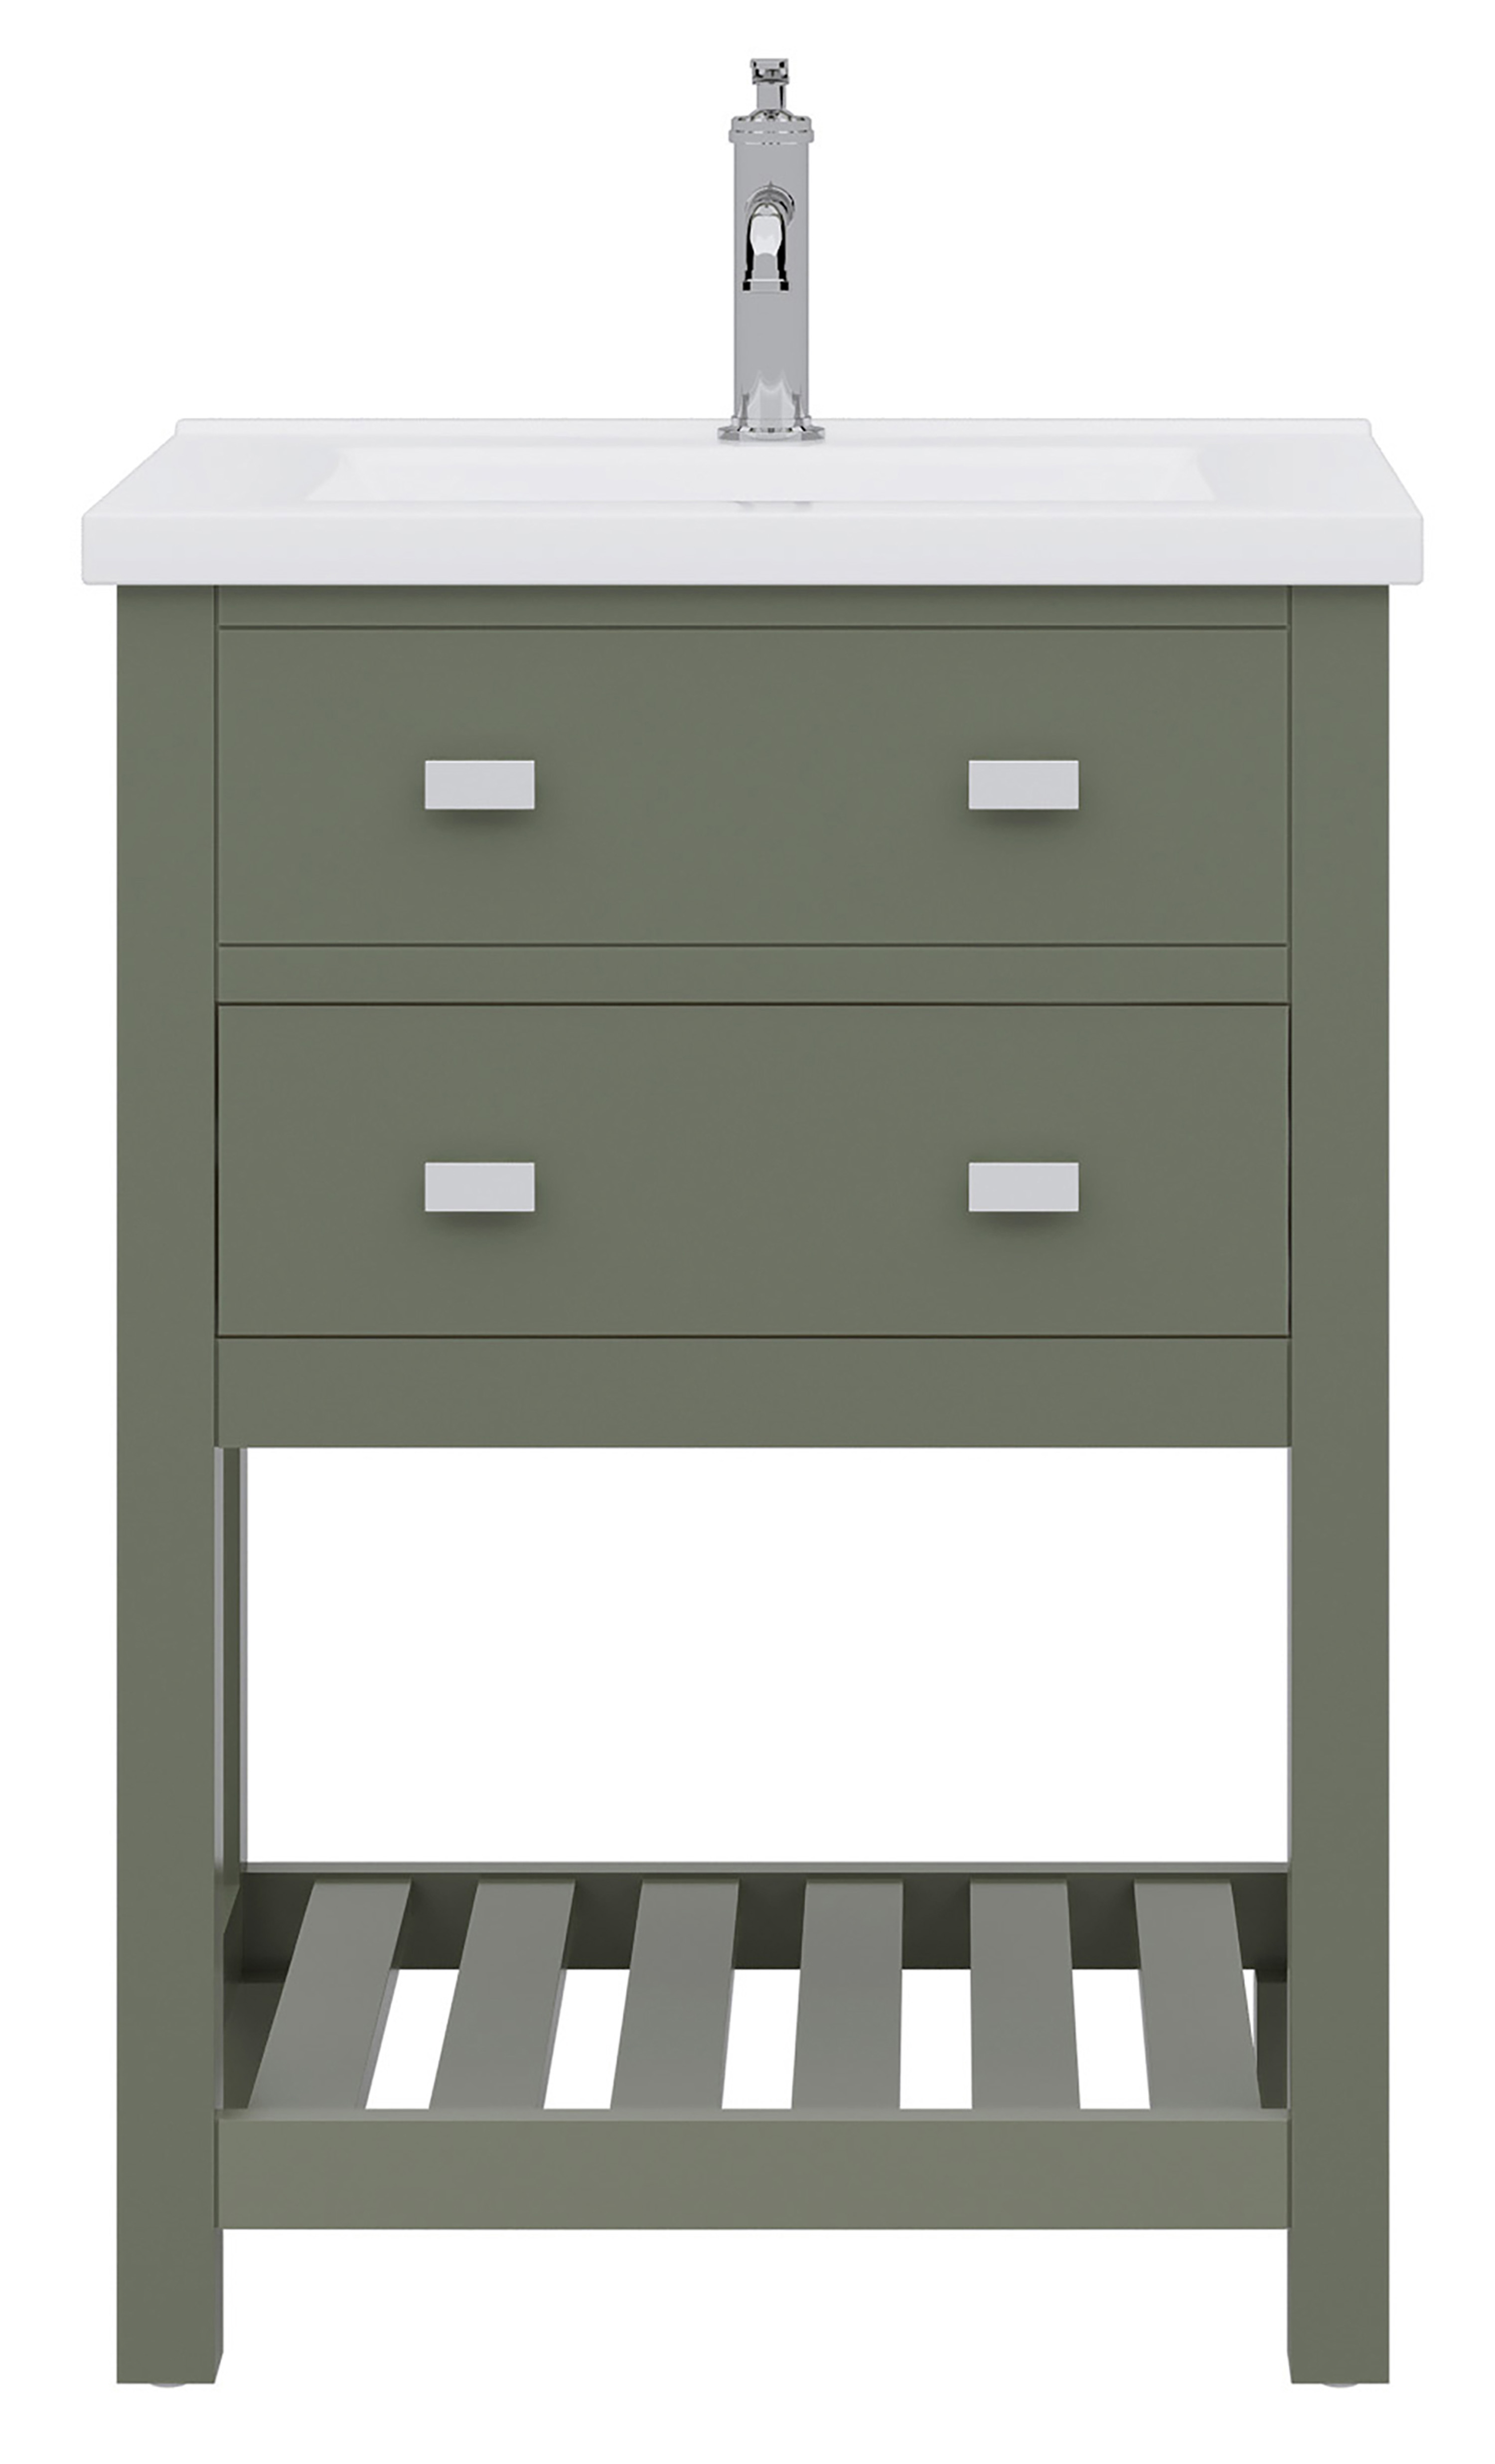 30" Integrated Ceramic Sink Top Vanity in Glacial Green with Faucet Options